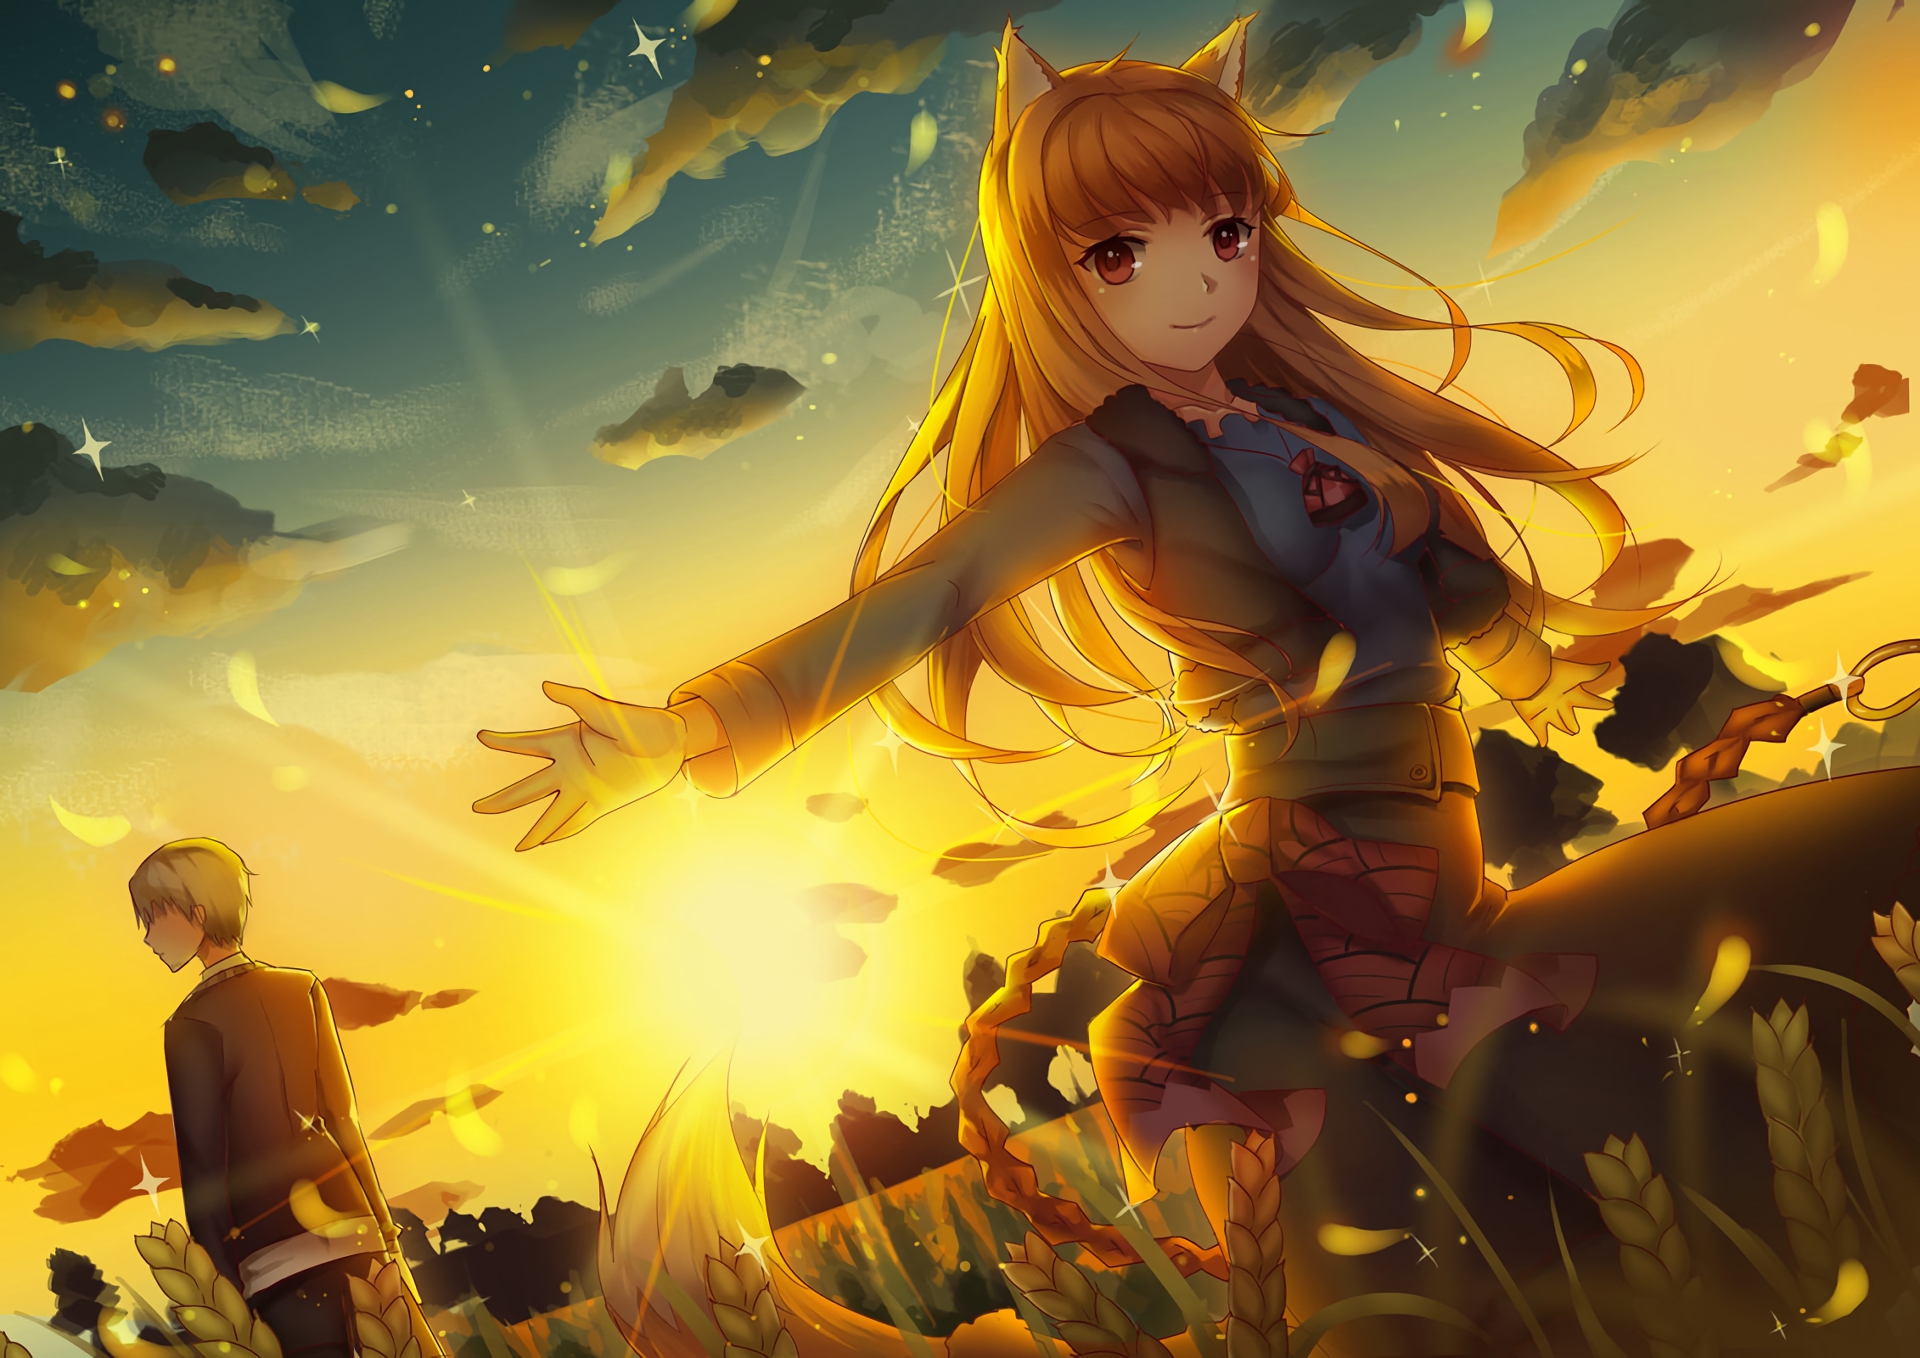 Spice and Wolf Art